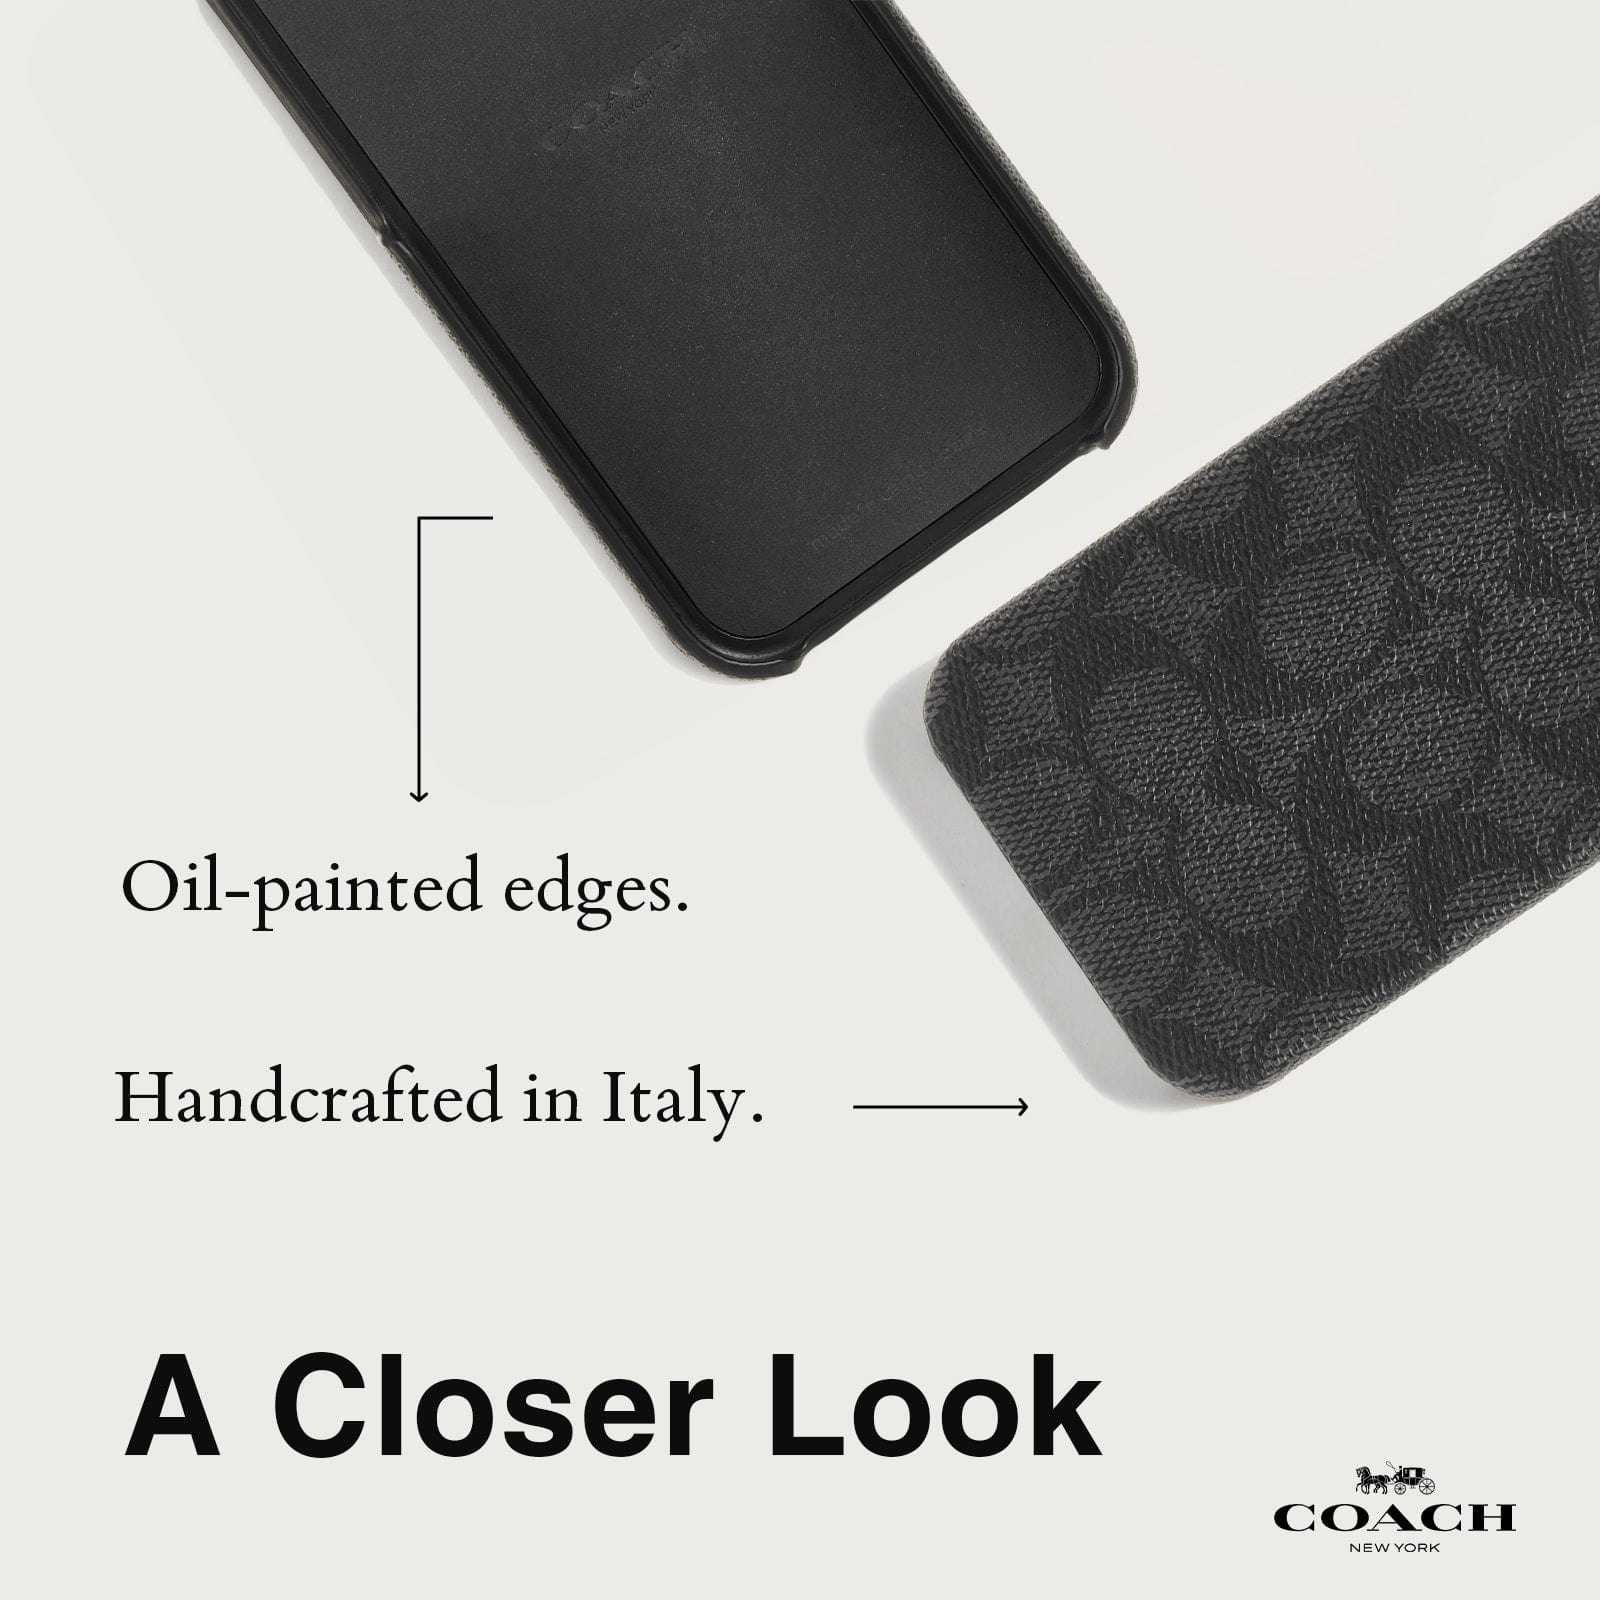 OIL-PAINTED EDGES. HANDCRAFTED IN ITALY. A CLOSER LOOK/